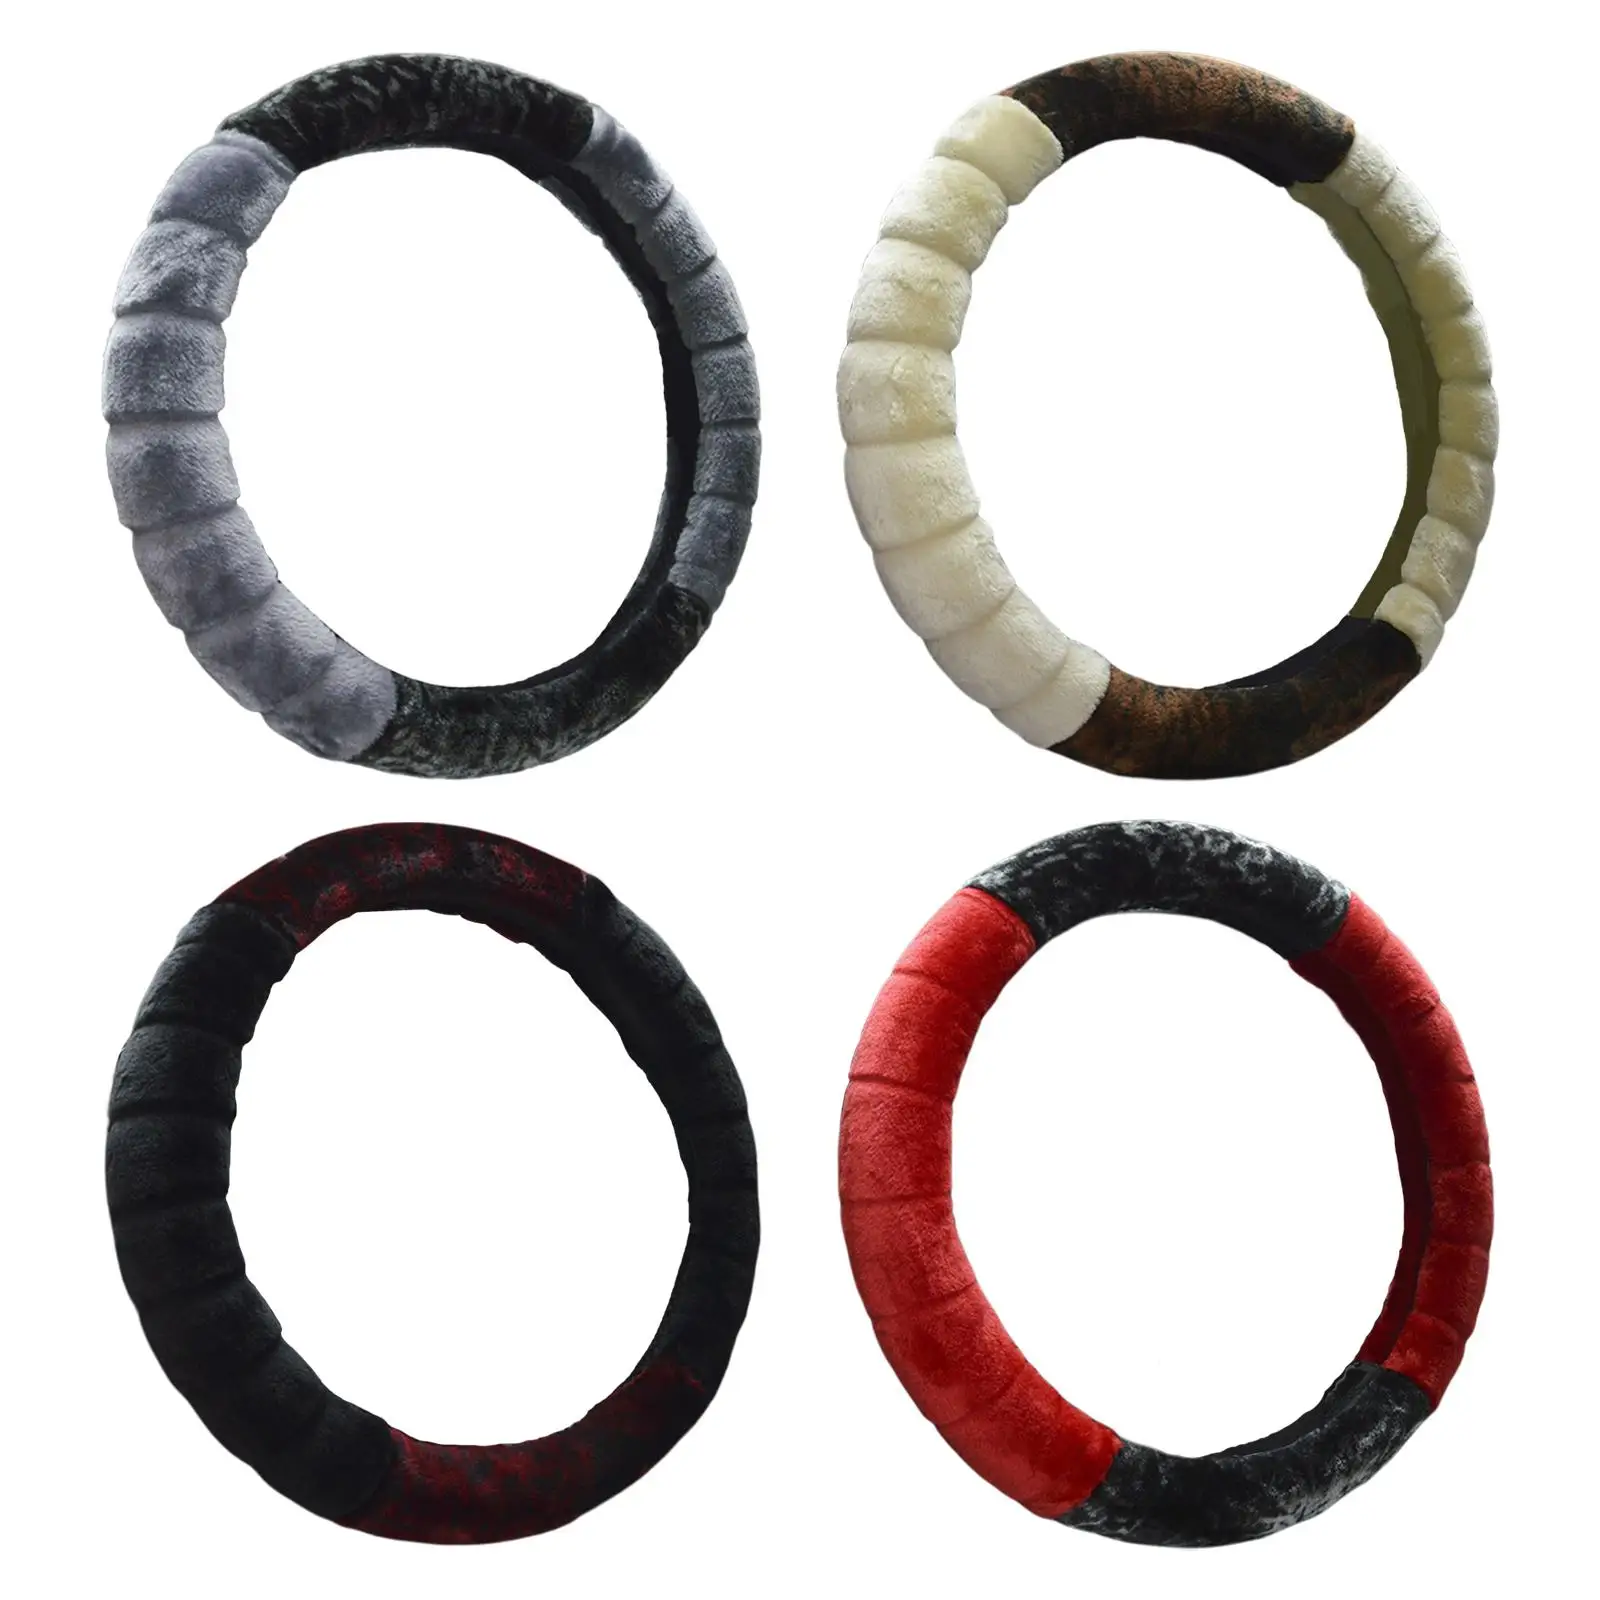 Car Steering Wheel Cover Soft Plush Universal 15 inch Protector Classic Car Parts Anti-Slip Steering Cover for Winter Warm